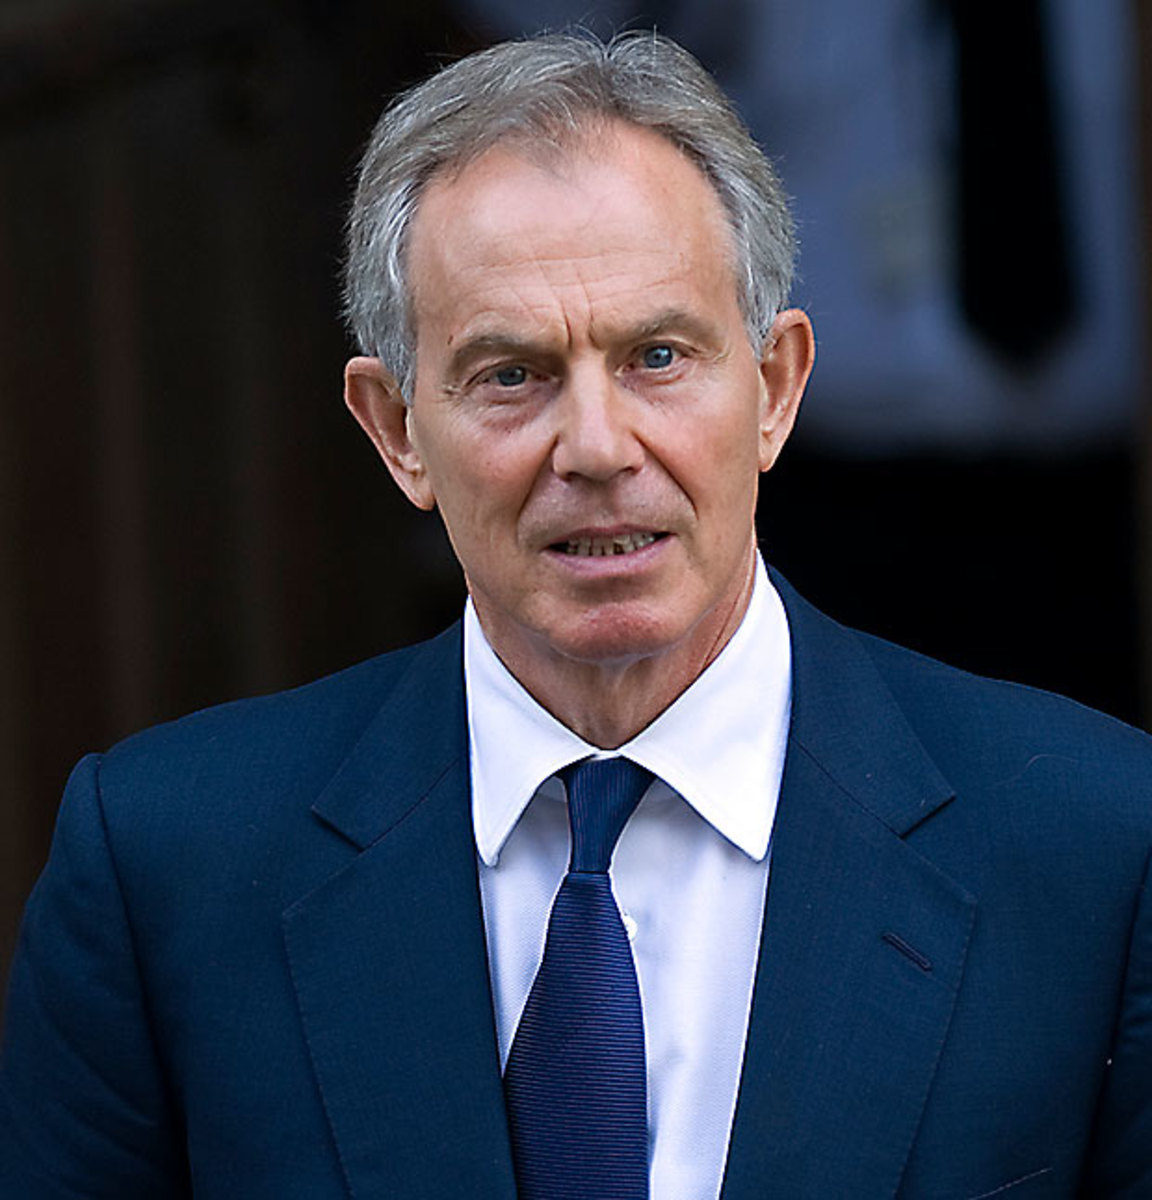 Tony Blair - Former Prime minister and leader of the labour party. 